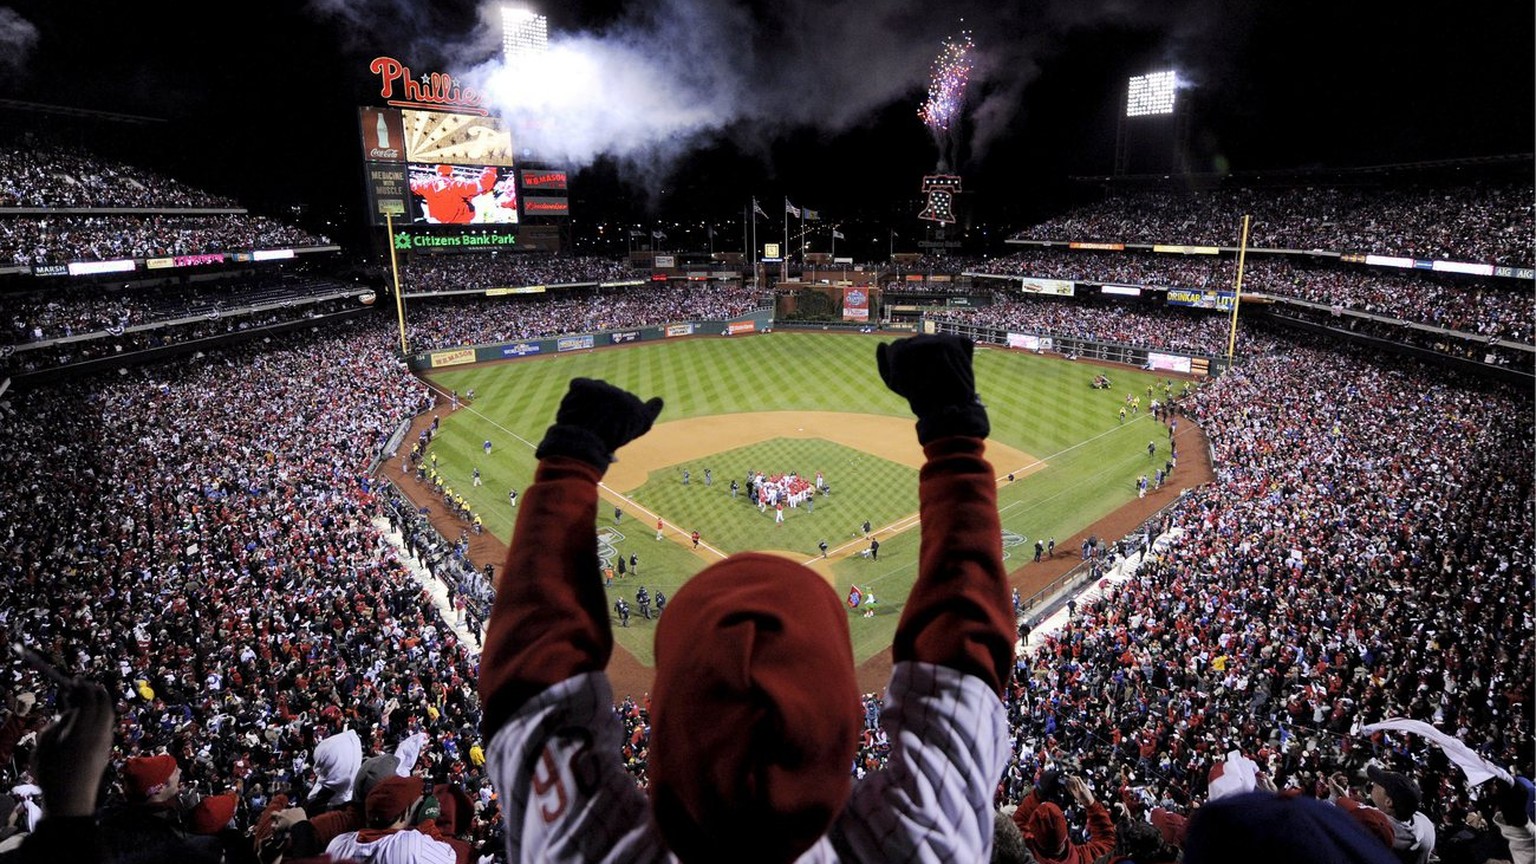 epa01535404 The Philadelphia Philles celebrate defeating the Tampa Bay Rays in game five to win the 2008 World Series at Citizens Bank Park in Philadelphia, Pennsylvania, USA on 29 October 2008. The P ...